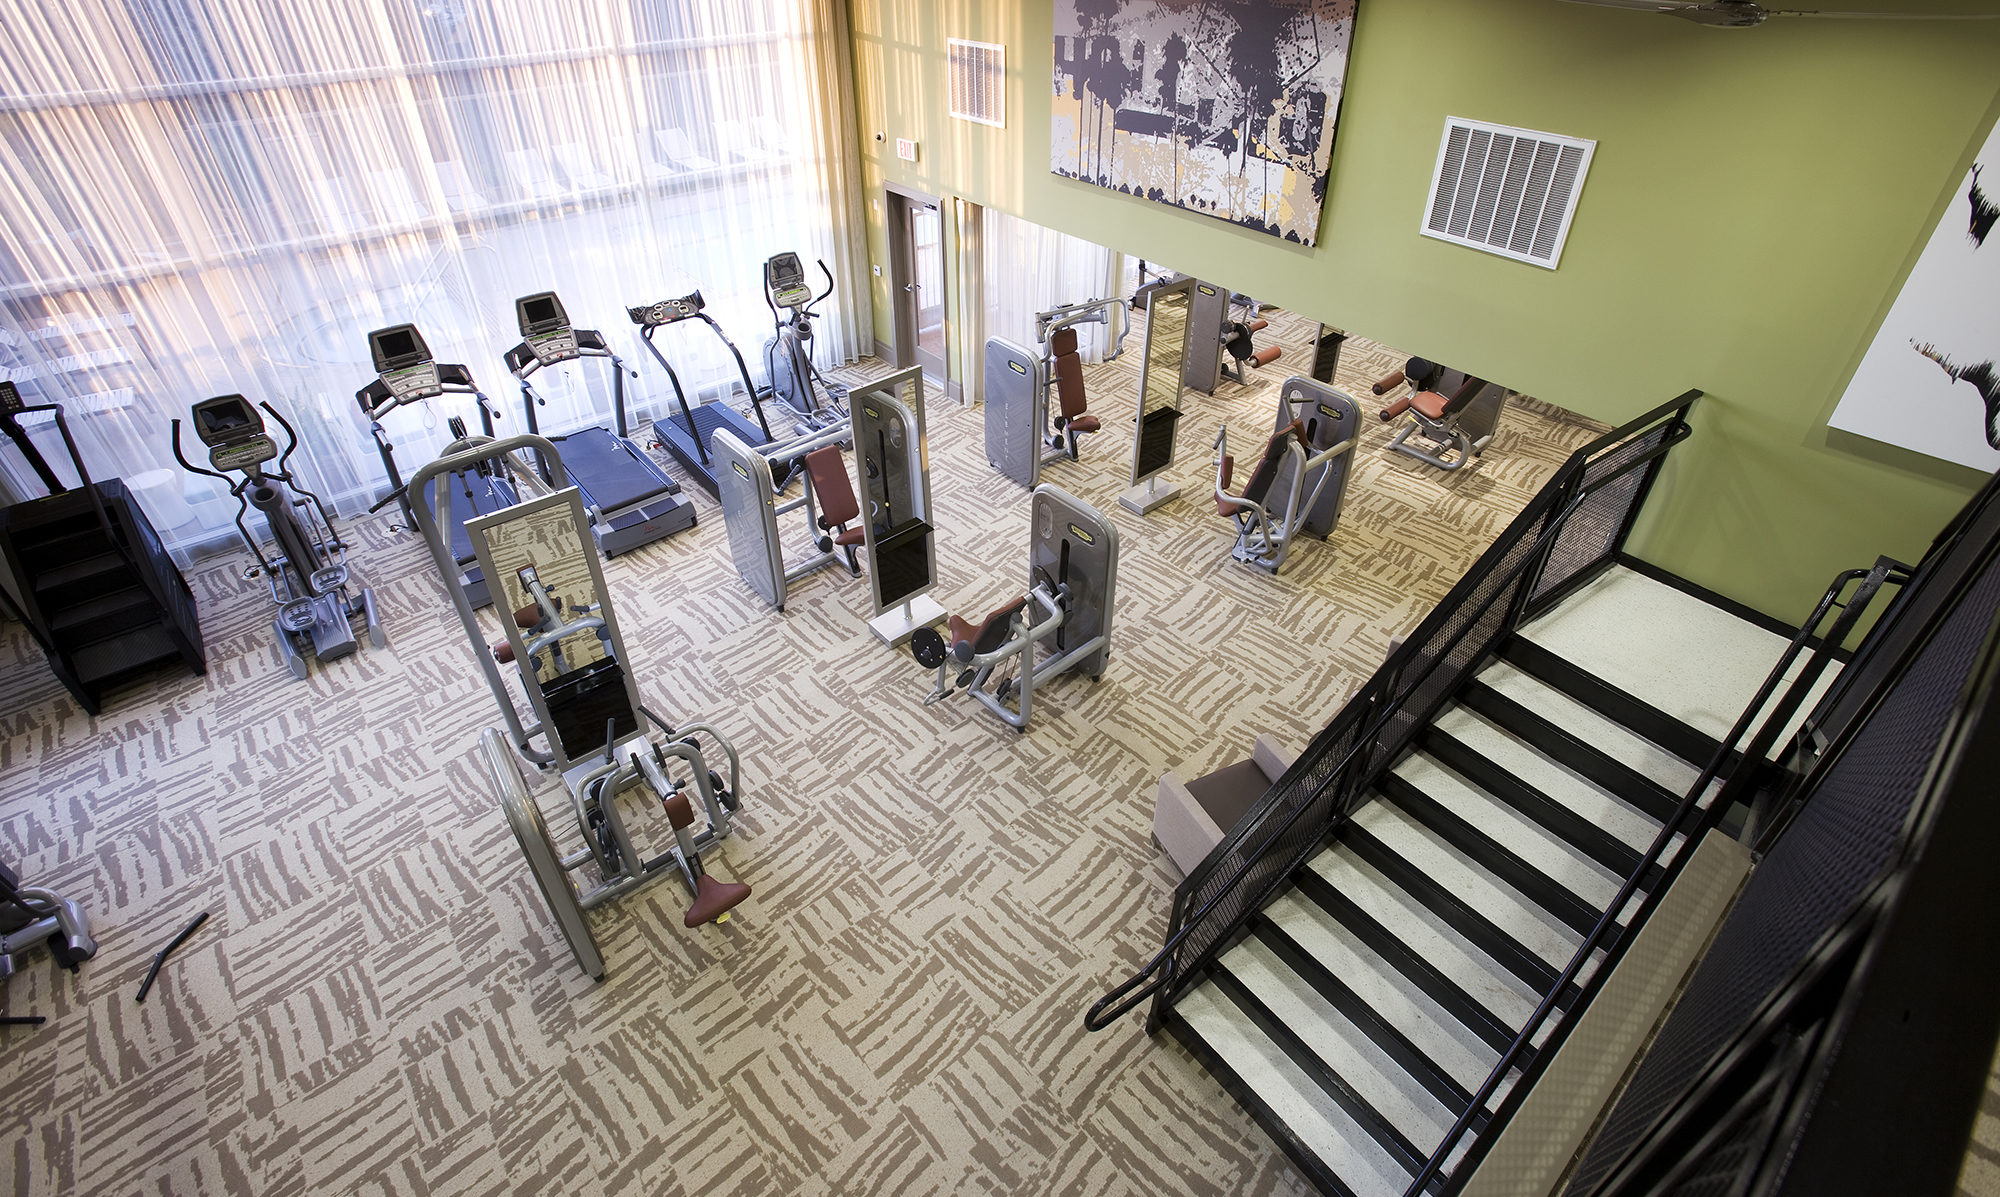 Gym from an ariel view with green walls and tan floor